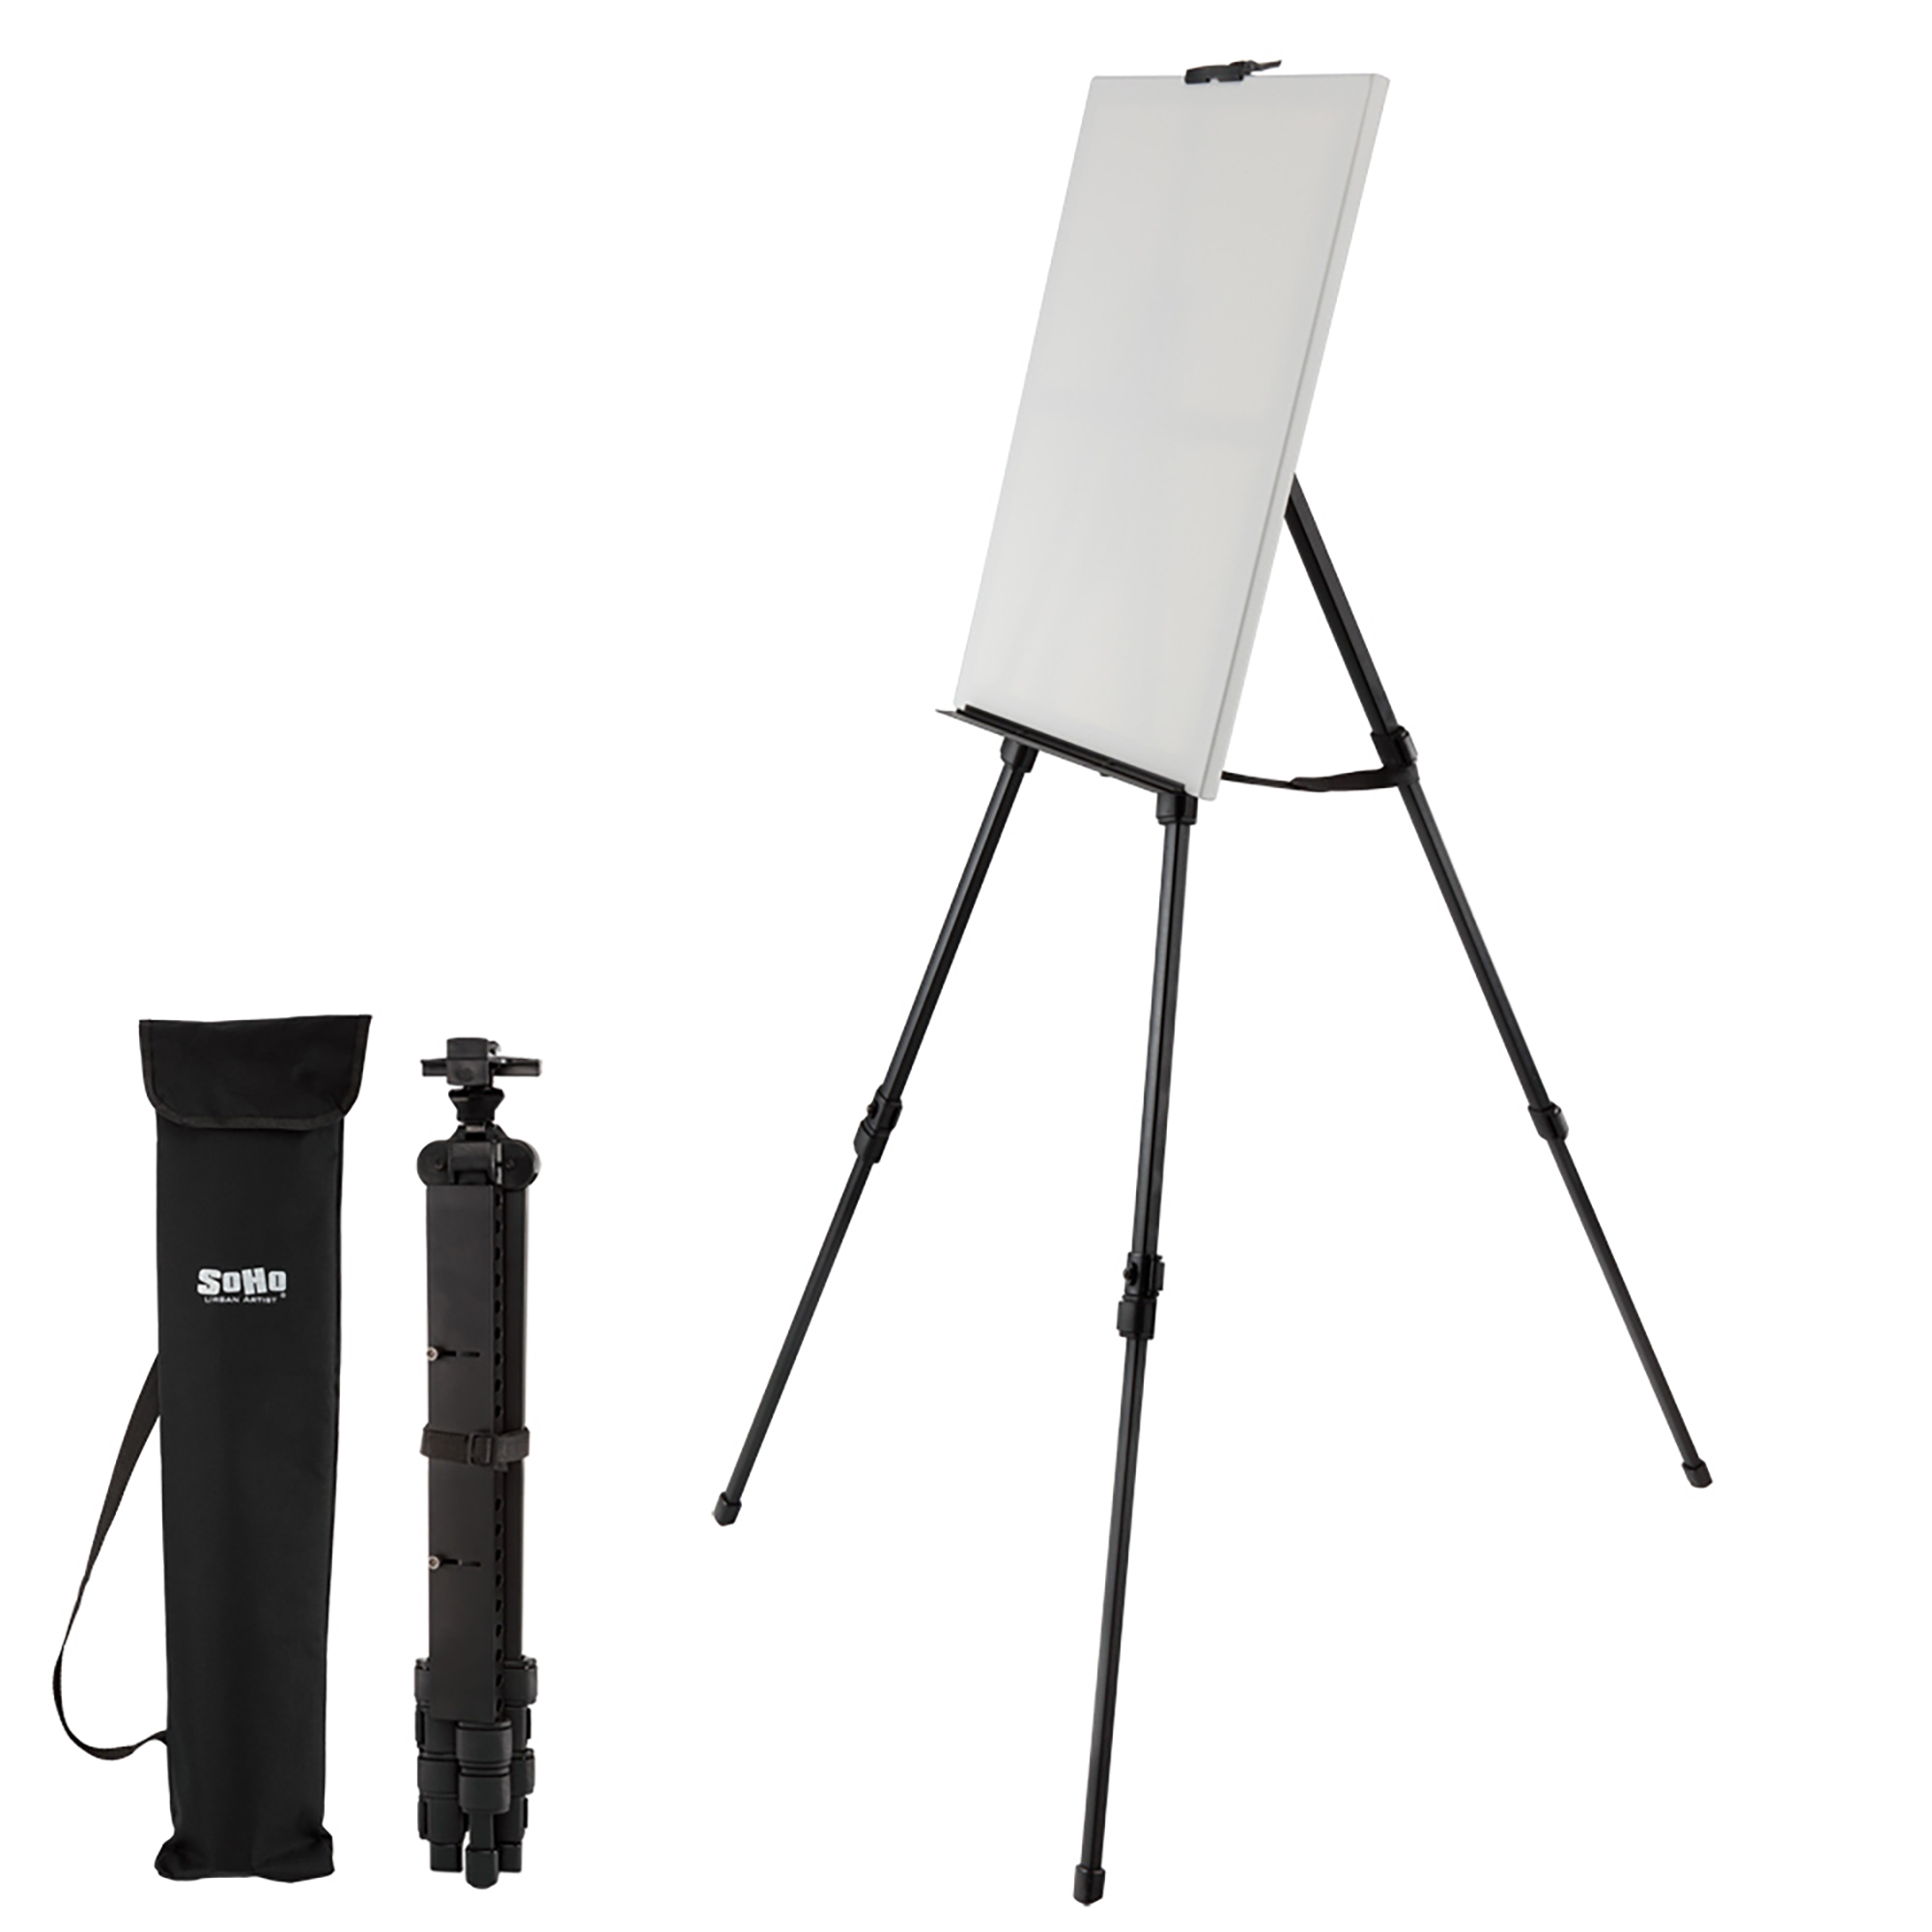 SoHo Urban Artist Travel Painting Field Easel - Light Weight Plein Aire  Design, Foldable with Adjustable Height and Carry Bag - Black Anodized